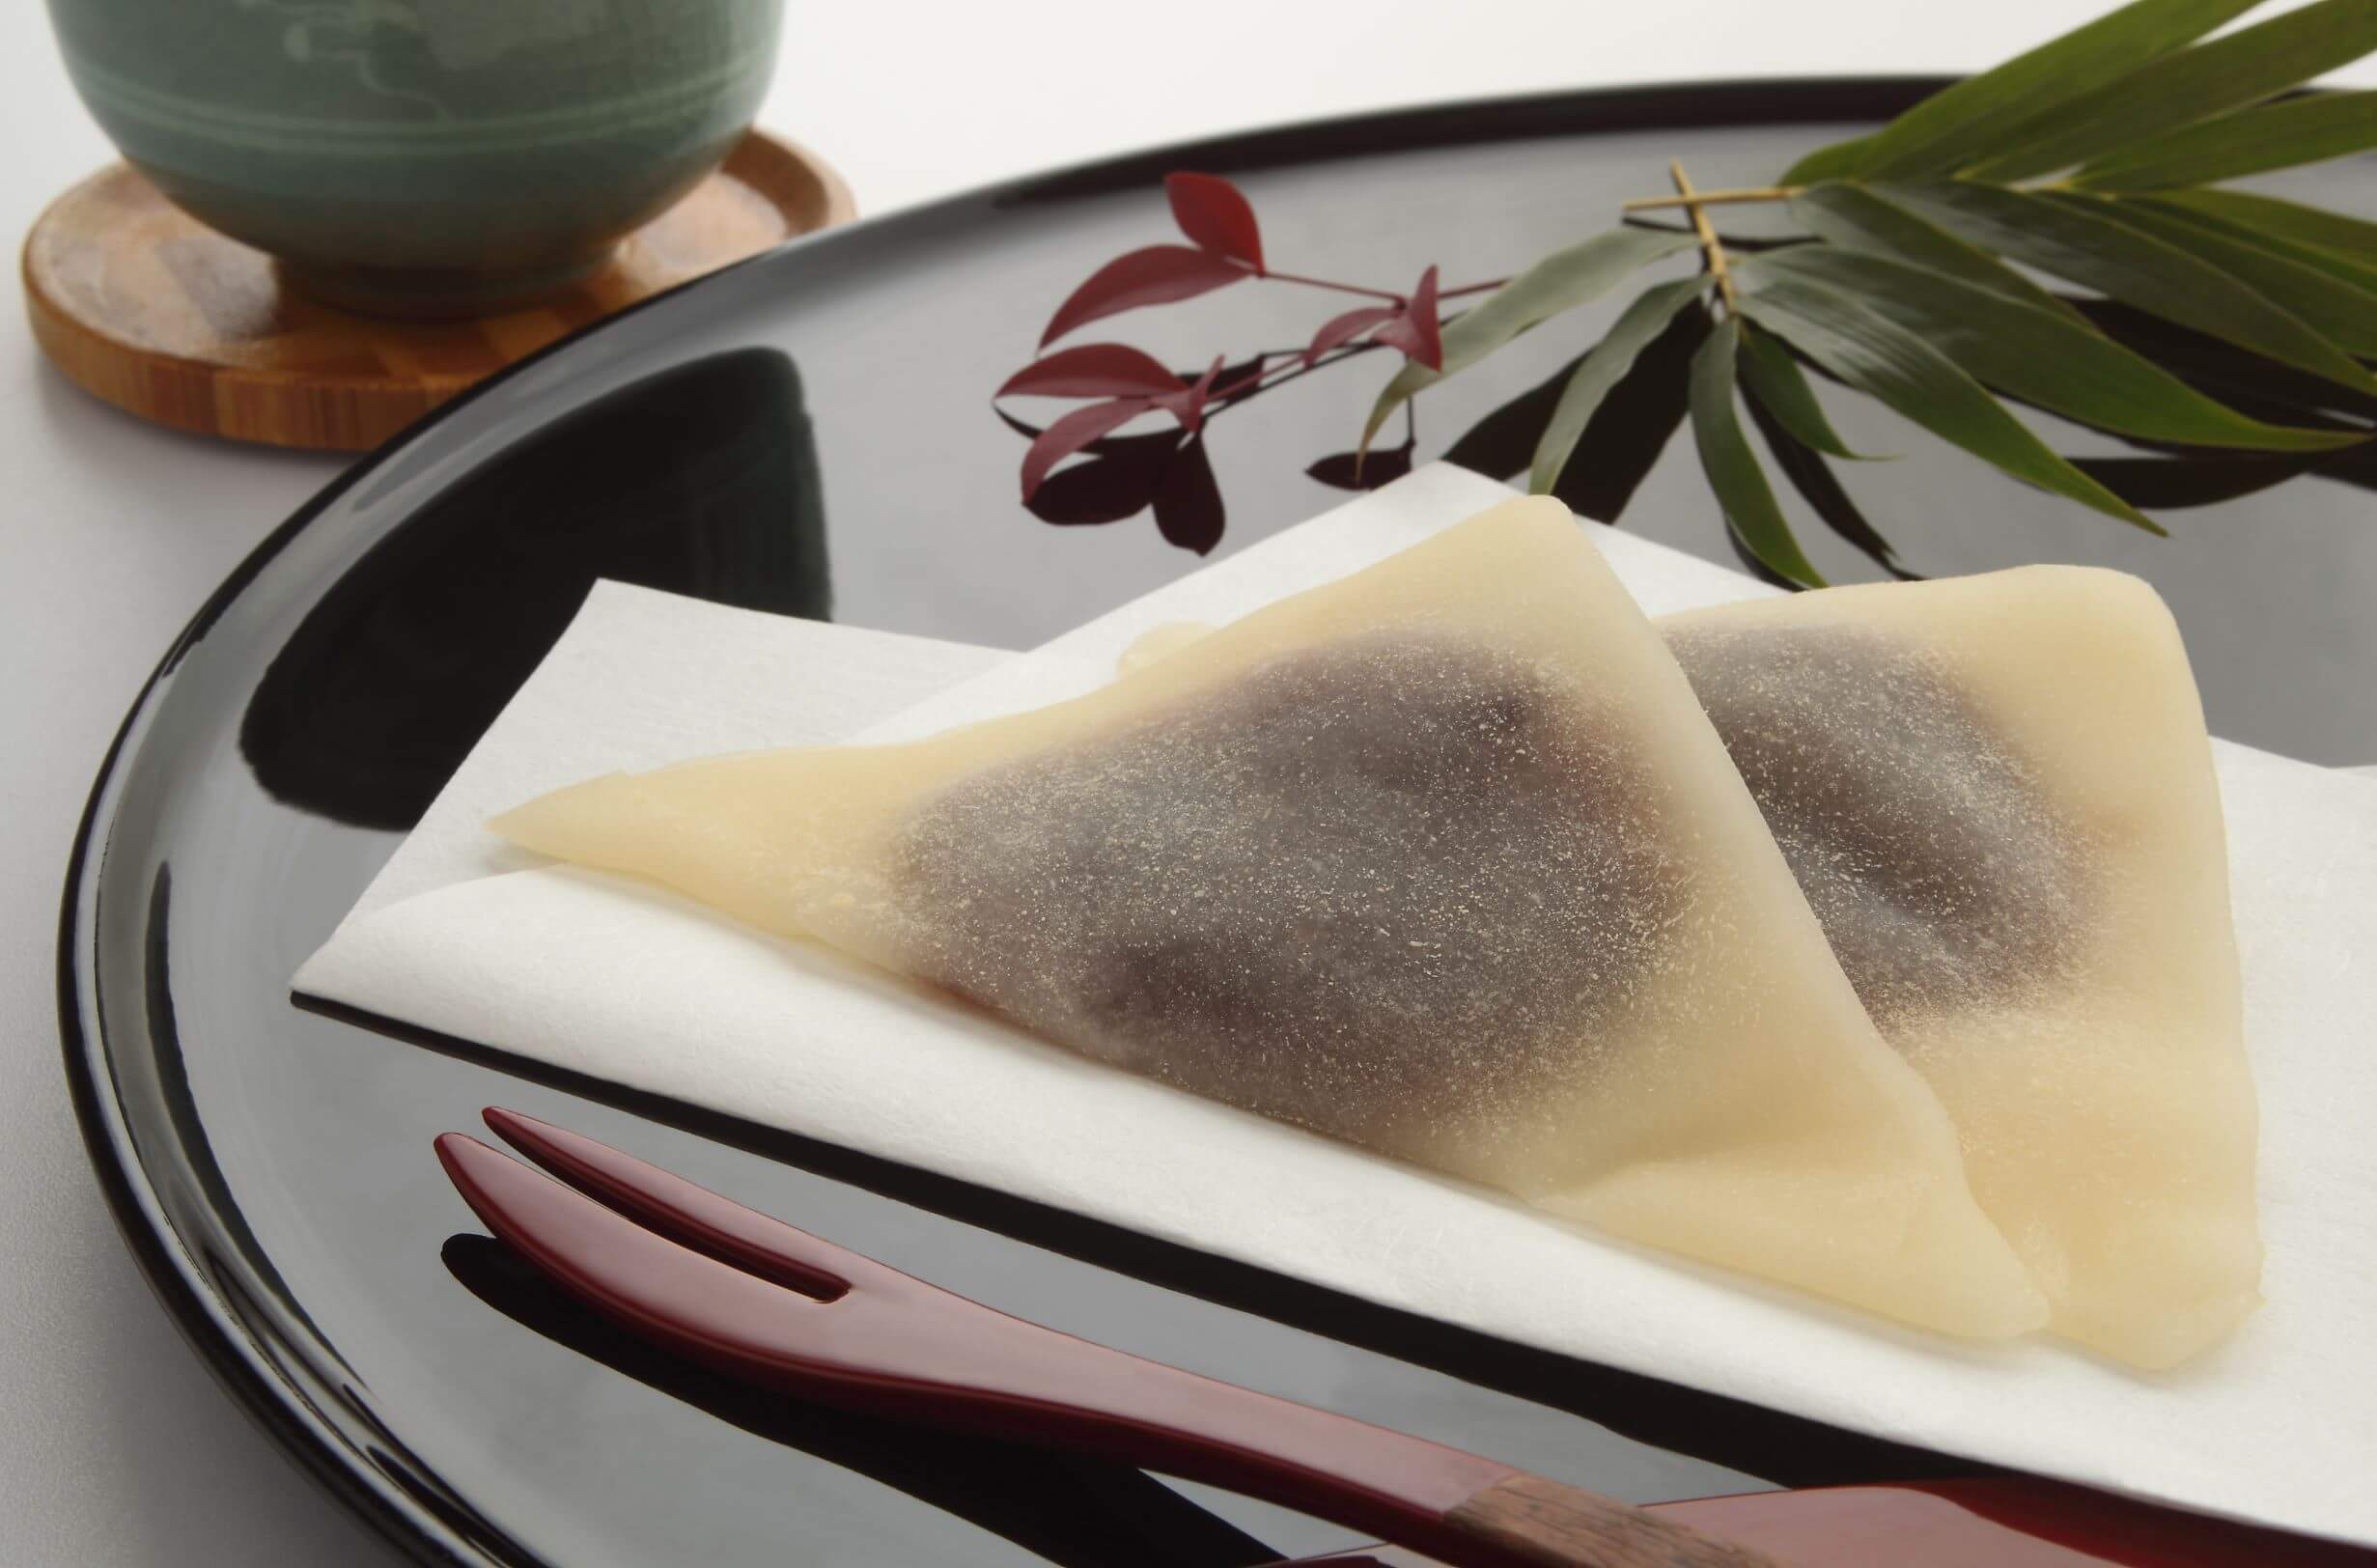 Yatsuhashi, thin mochi folded in half and filled with red bean paste